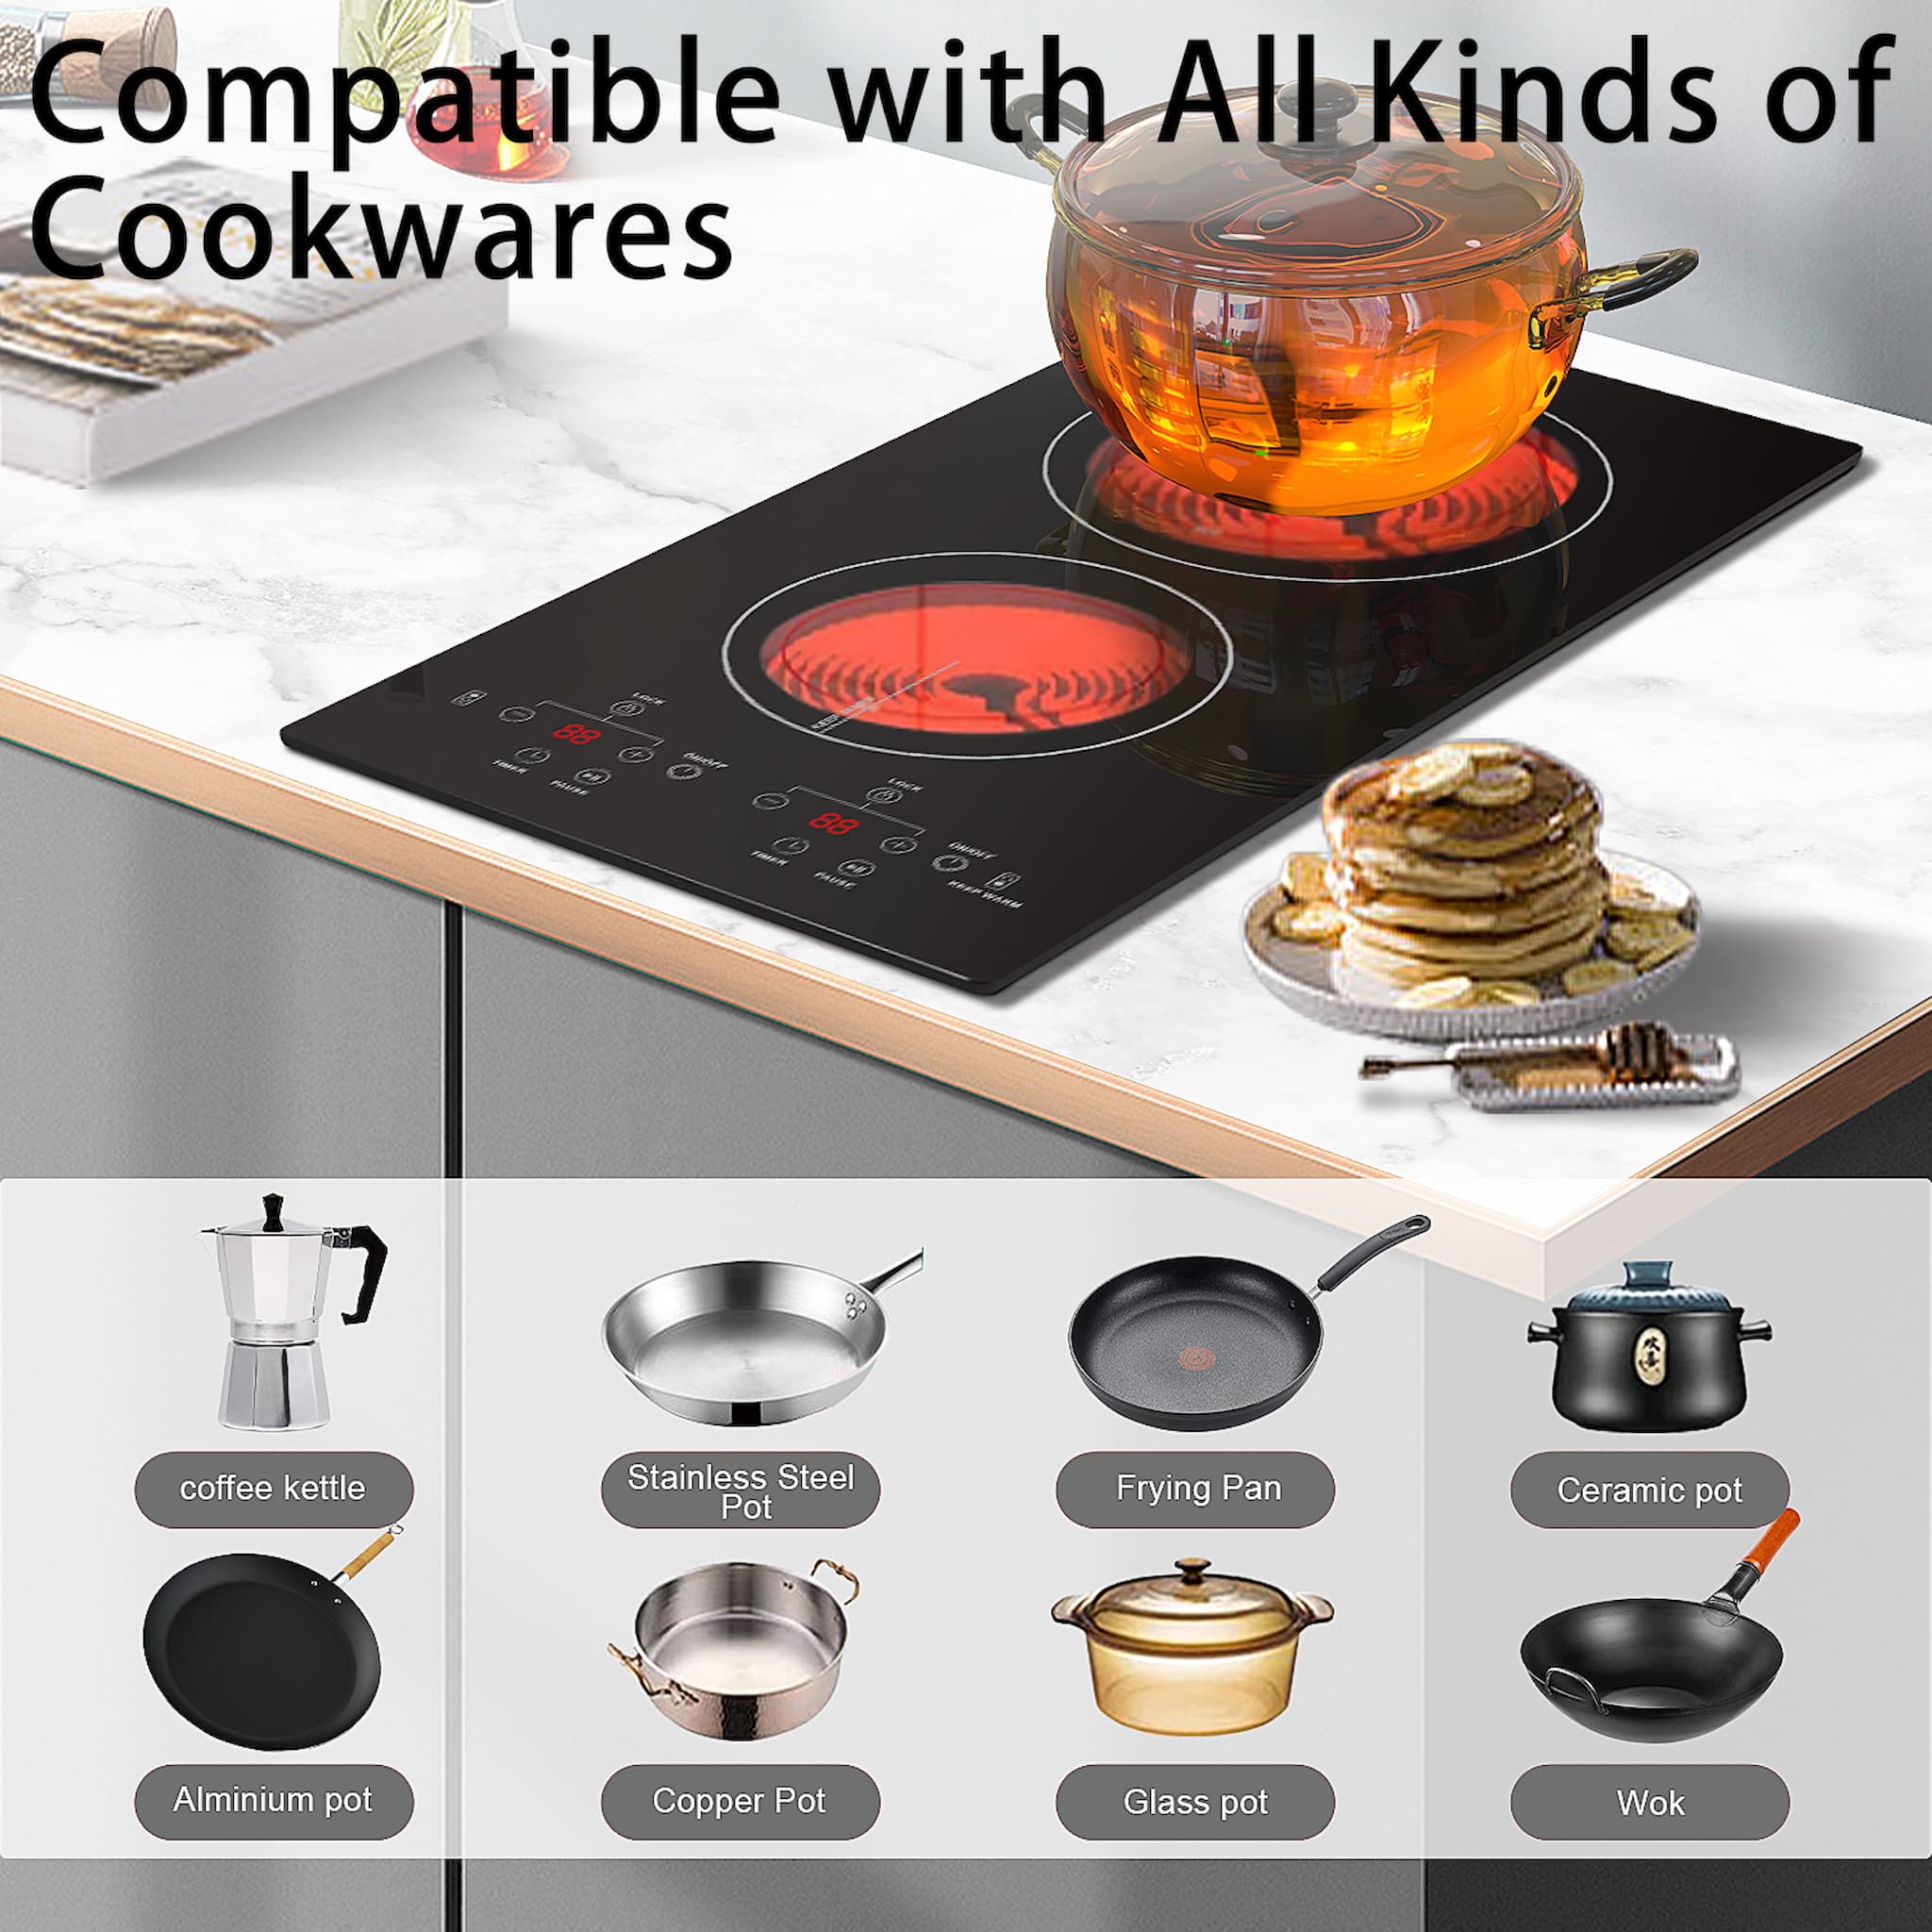 The built-in 12 inch 110v cooktop is a electric ceramic cooktop, which is very convenient that compatible with any cookware such as iron, aluminum, stainless steel, glass cookware and so on.